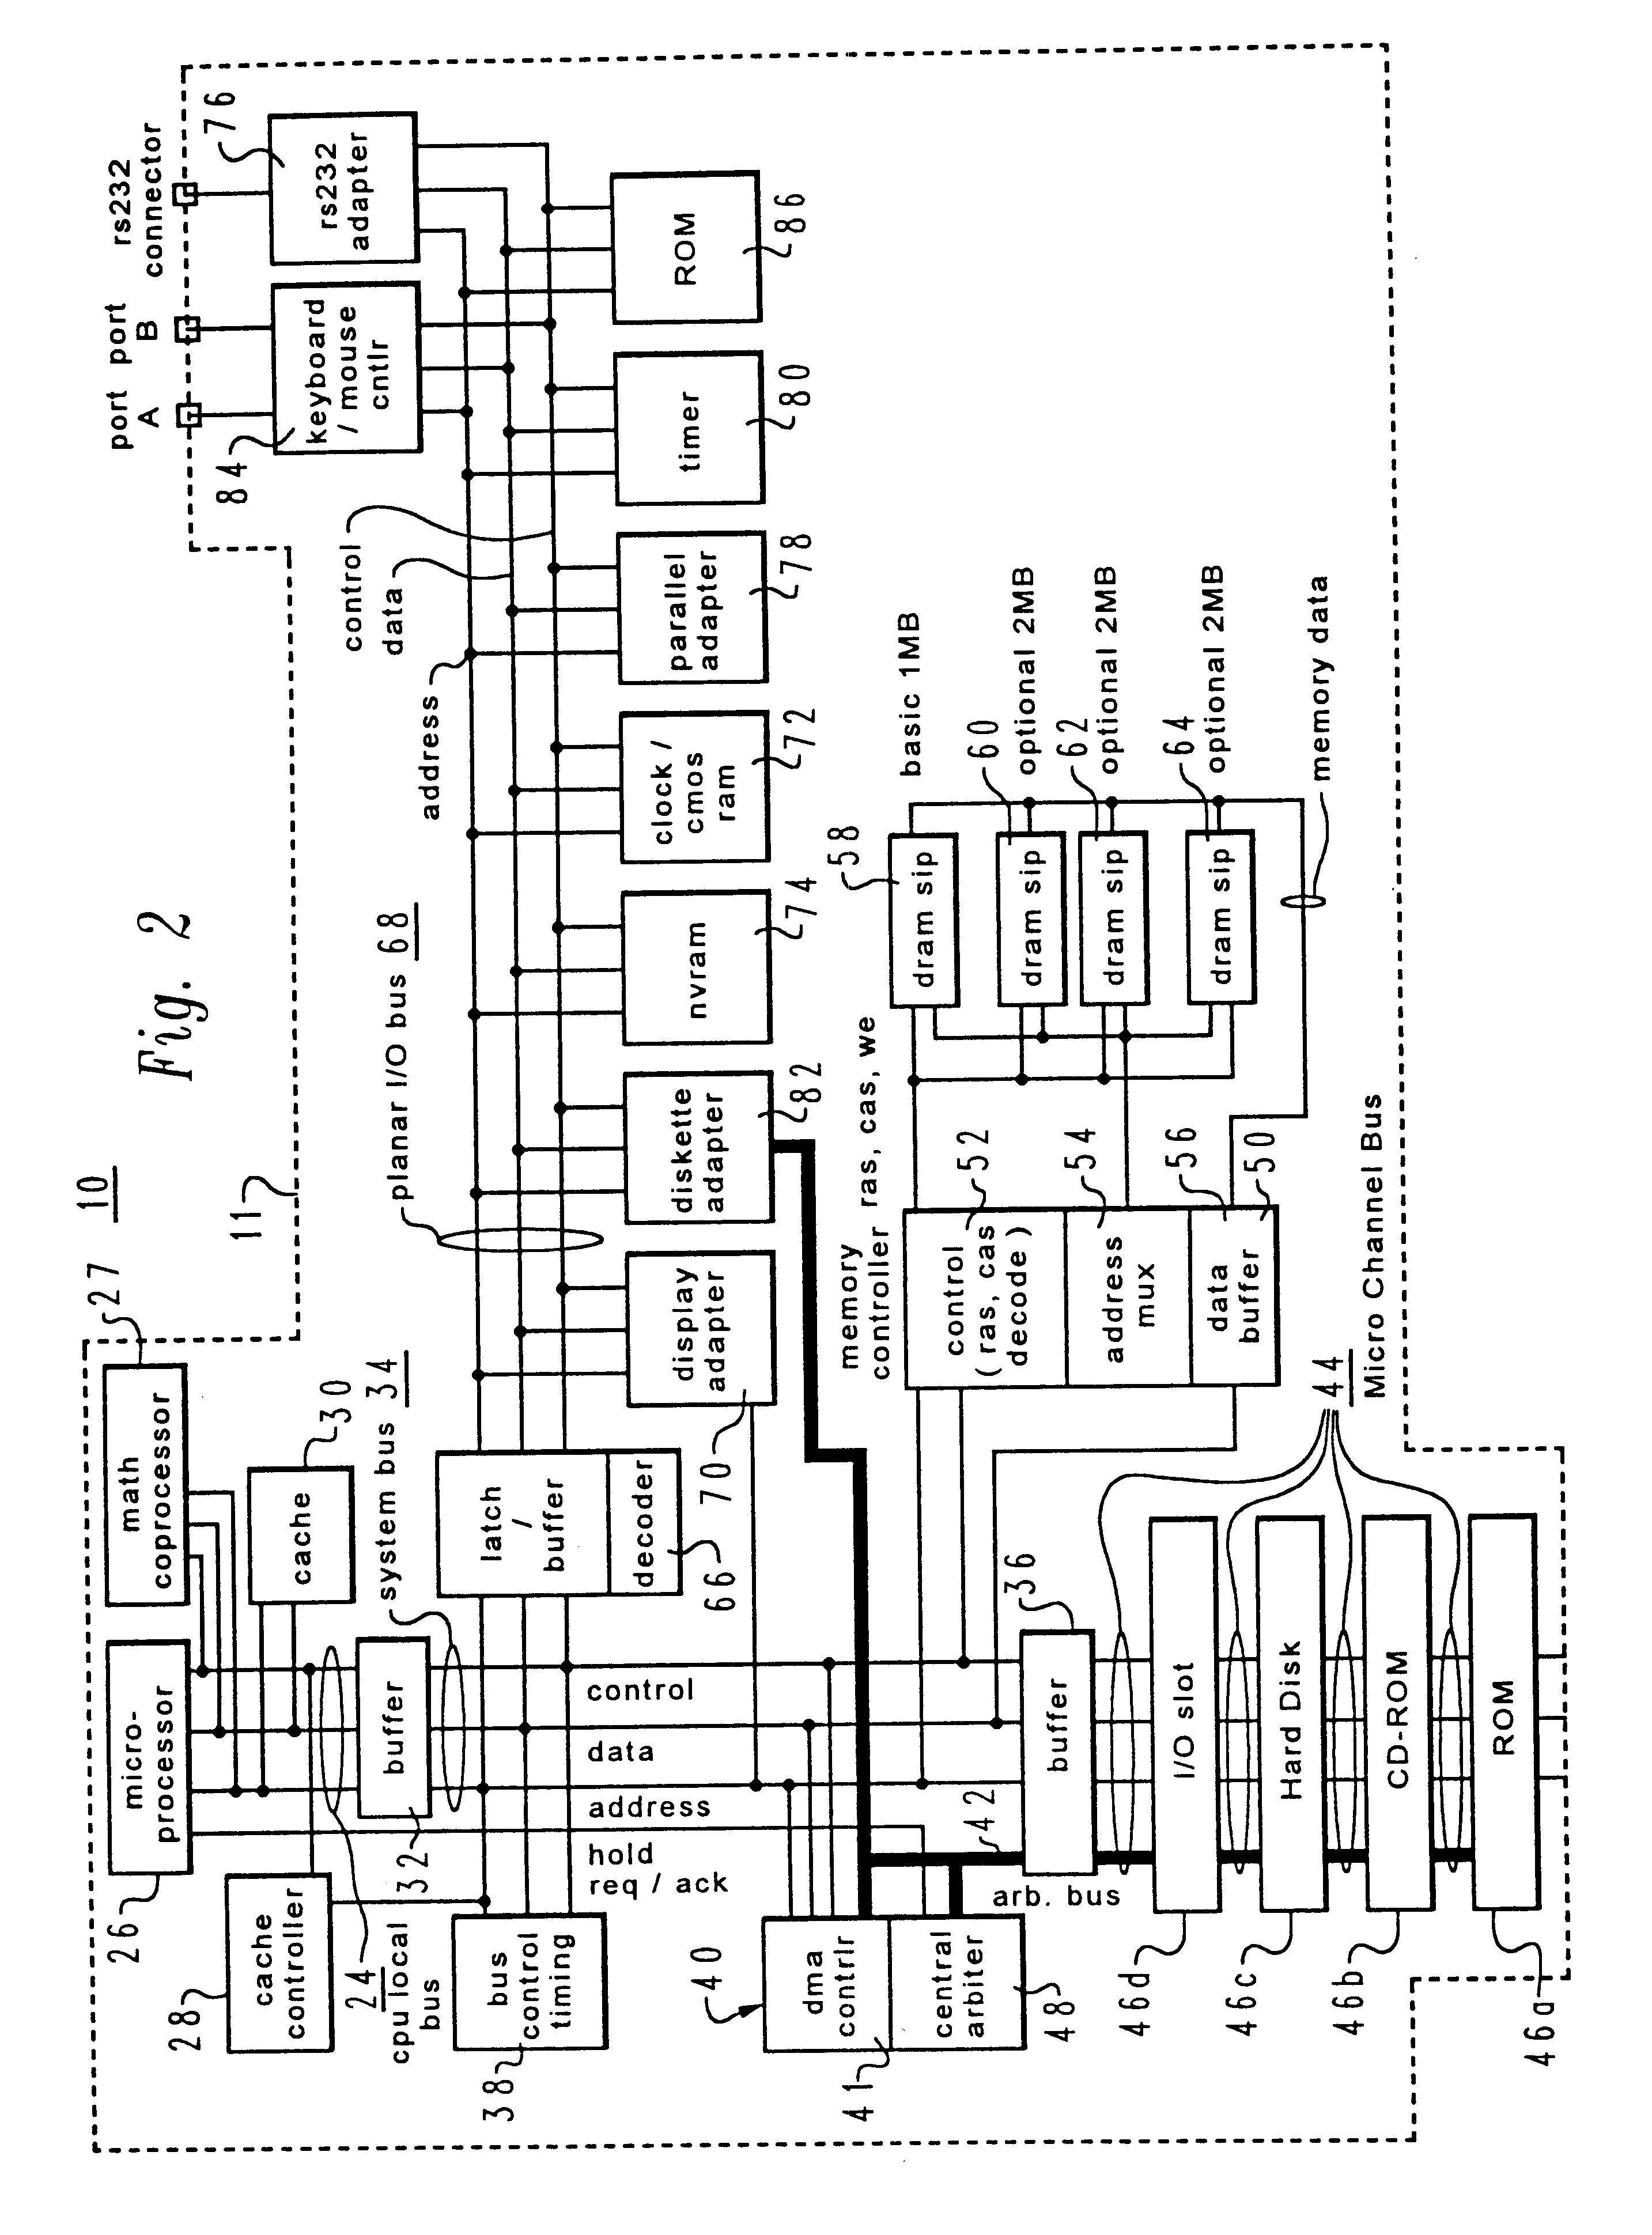 Method and system for the secured distribution of multimedia titles